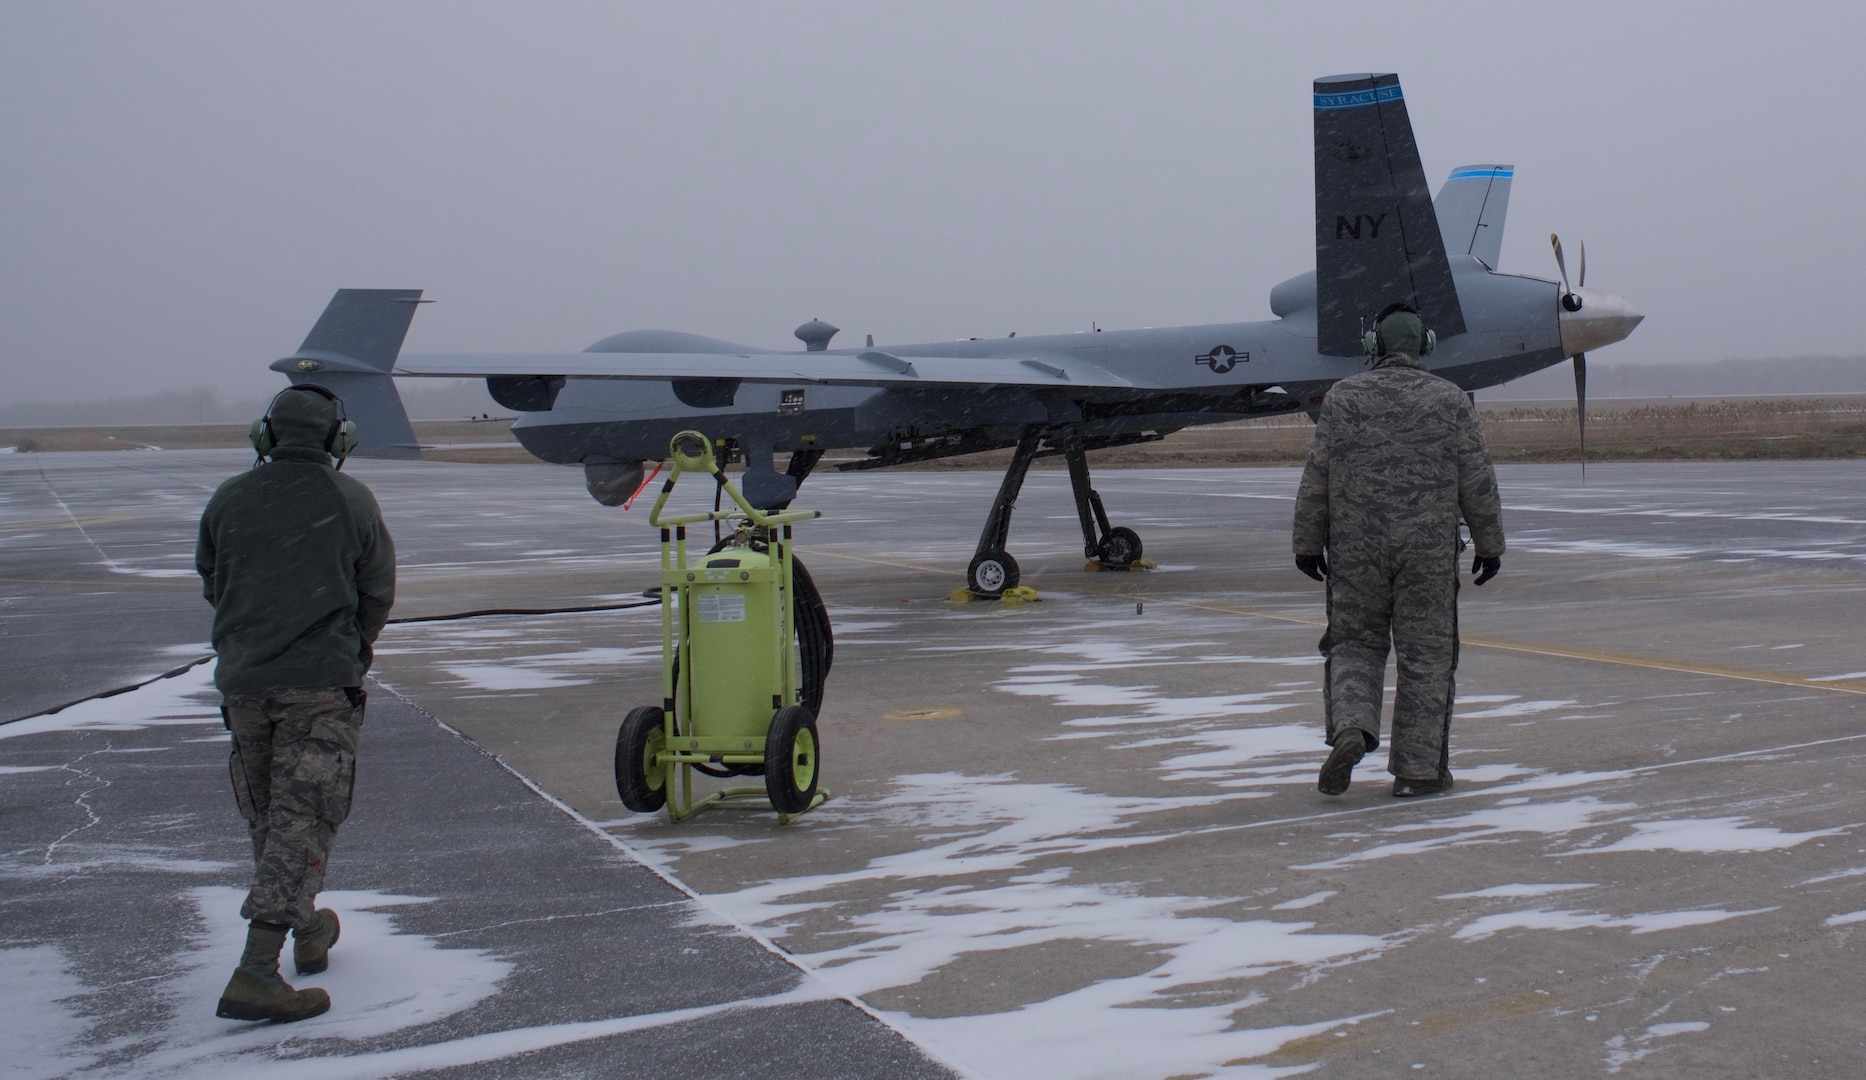 Members of the 174th Maintenance Group prepare to taxi the first Block 5 MQ-9 Reaper on Feb., 12, 2019, at Hancock Field Air National Guard Base in  Syracuse, N.Y. A Block 5 is an updated version of the MQ-9 that allows upgraded  communication and electrical systems.